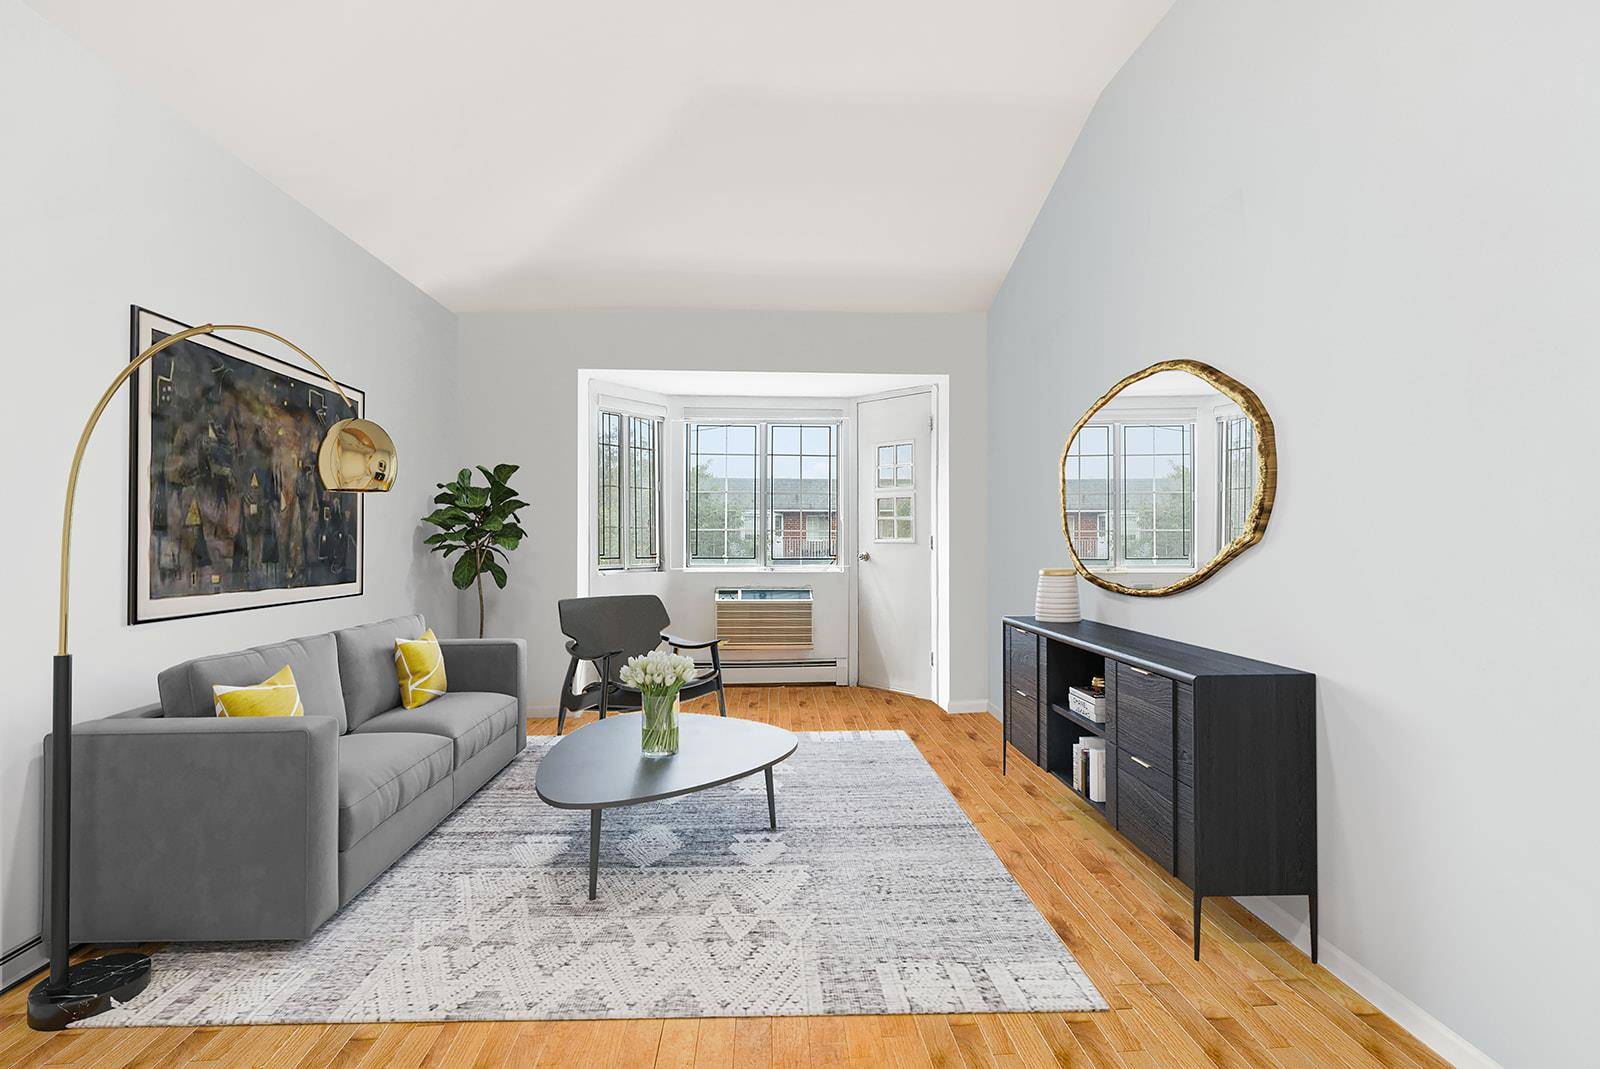 Spacious Condo in Georgetown, BrooklynWelcome to this delightful 3 bedroom, 2 bathroom condo nestled in the heart of Georgetown, Brooklyn.